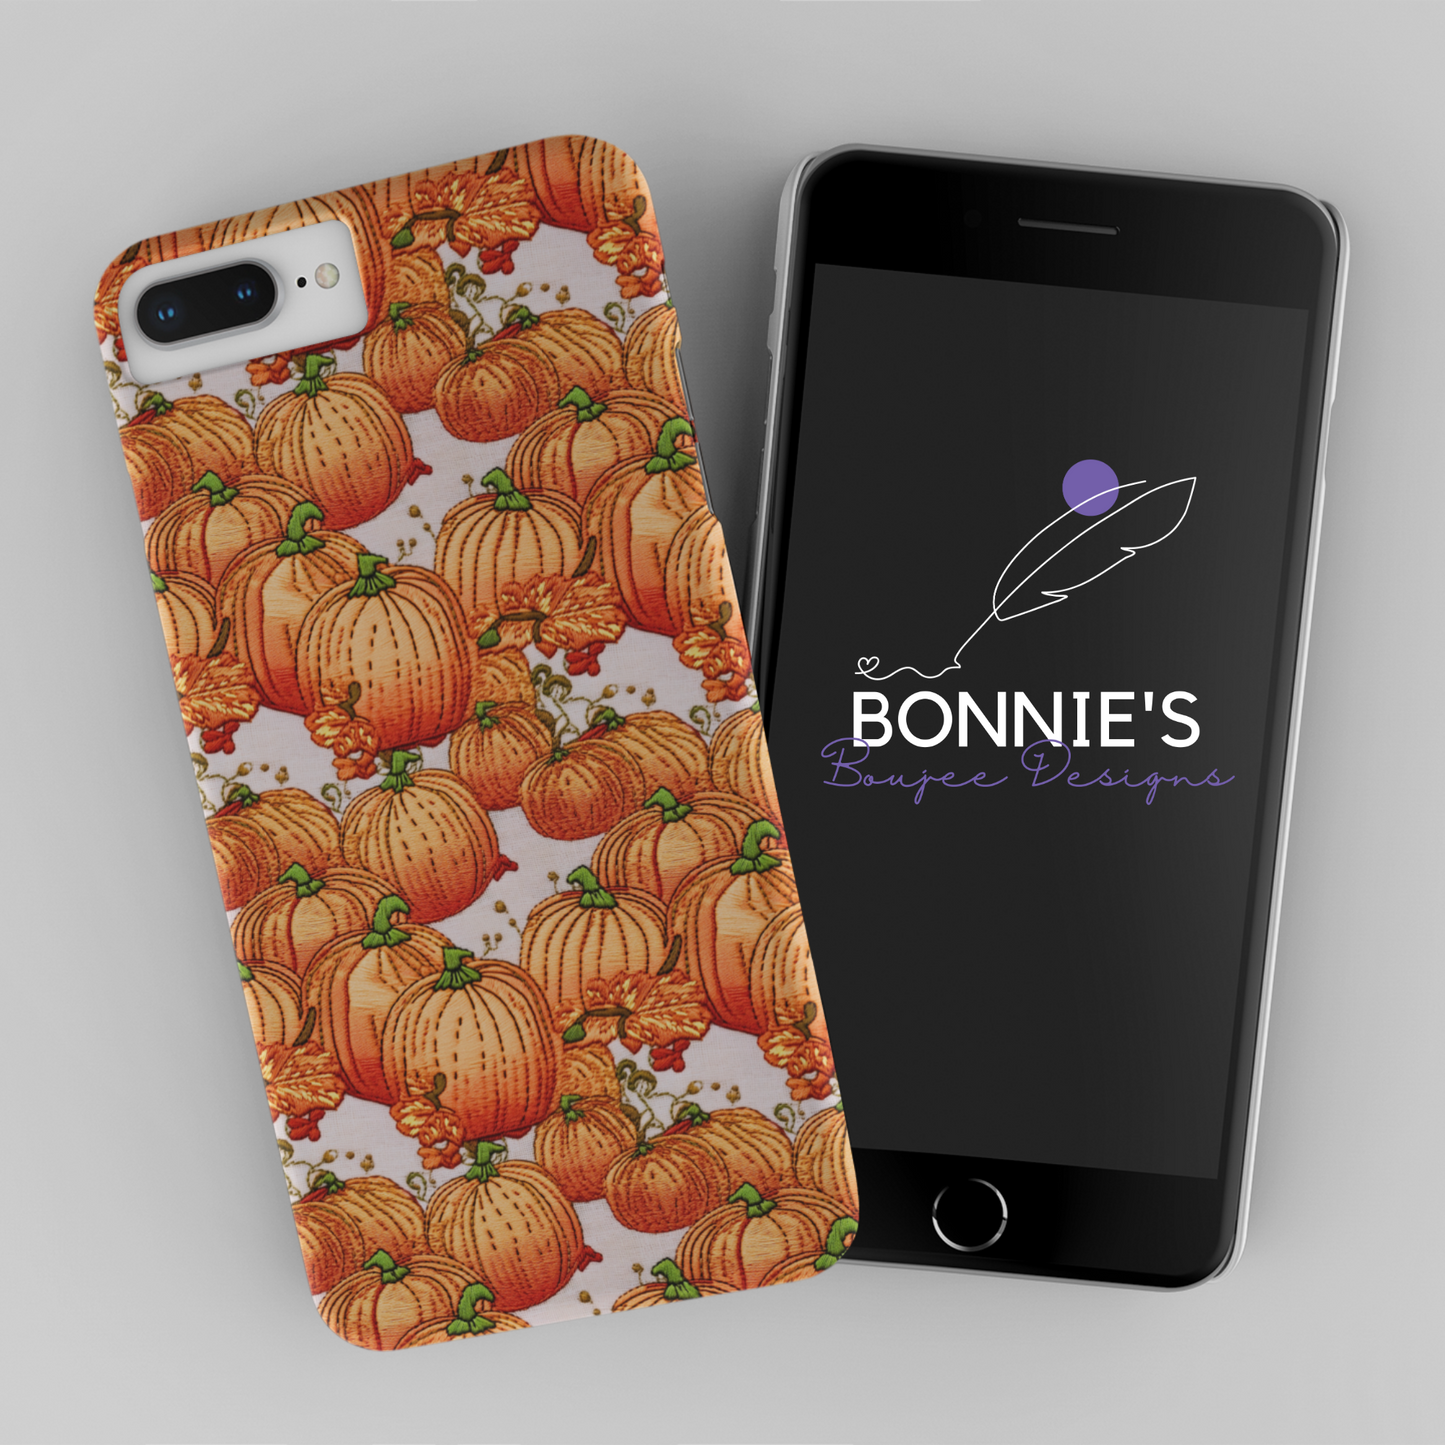 Embroidery of Orange Pumpkins on a White Background Seamless File